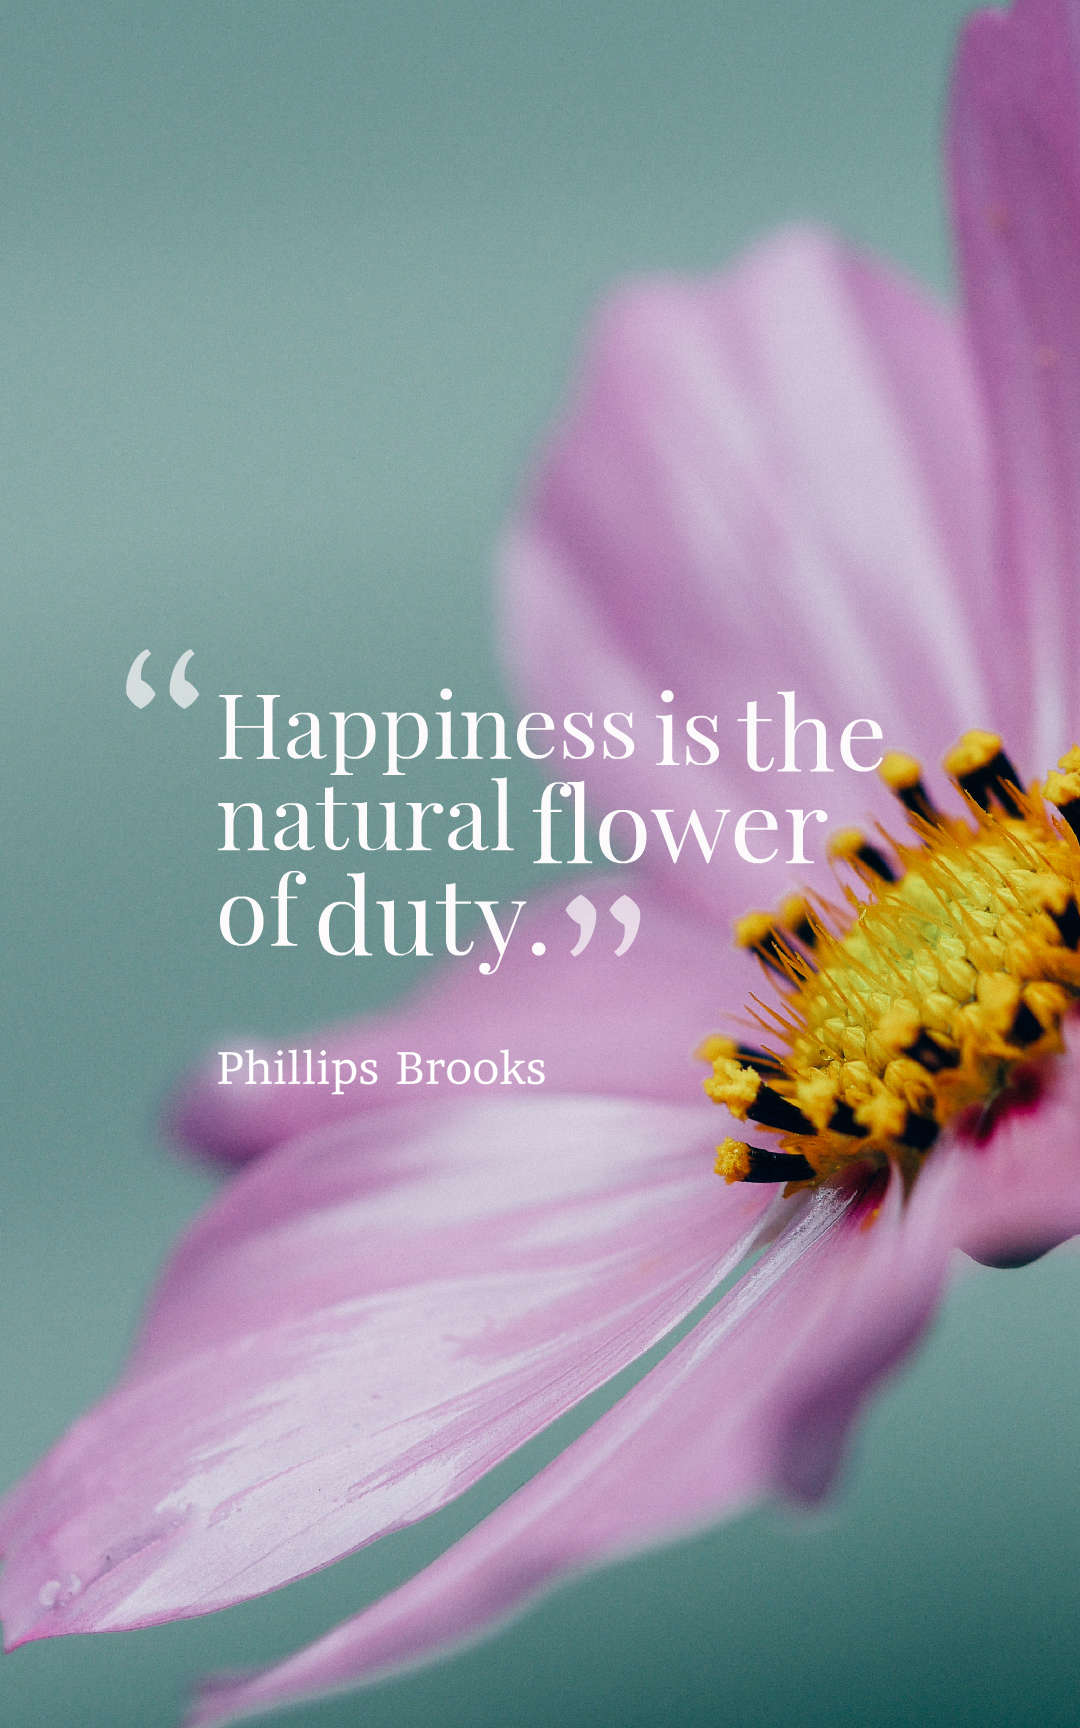 75 Amazing Flower Quotes With Images